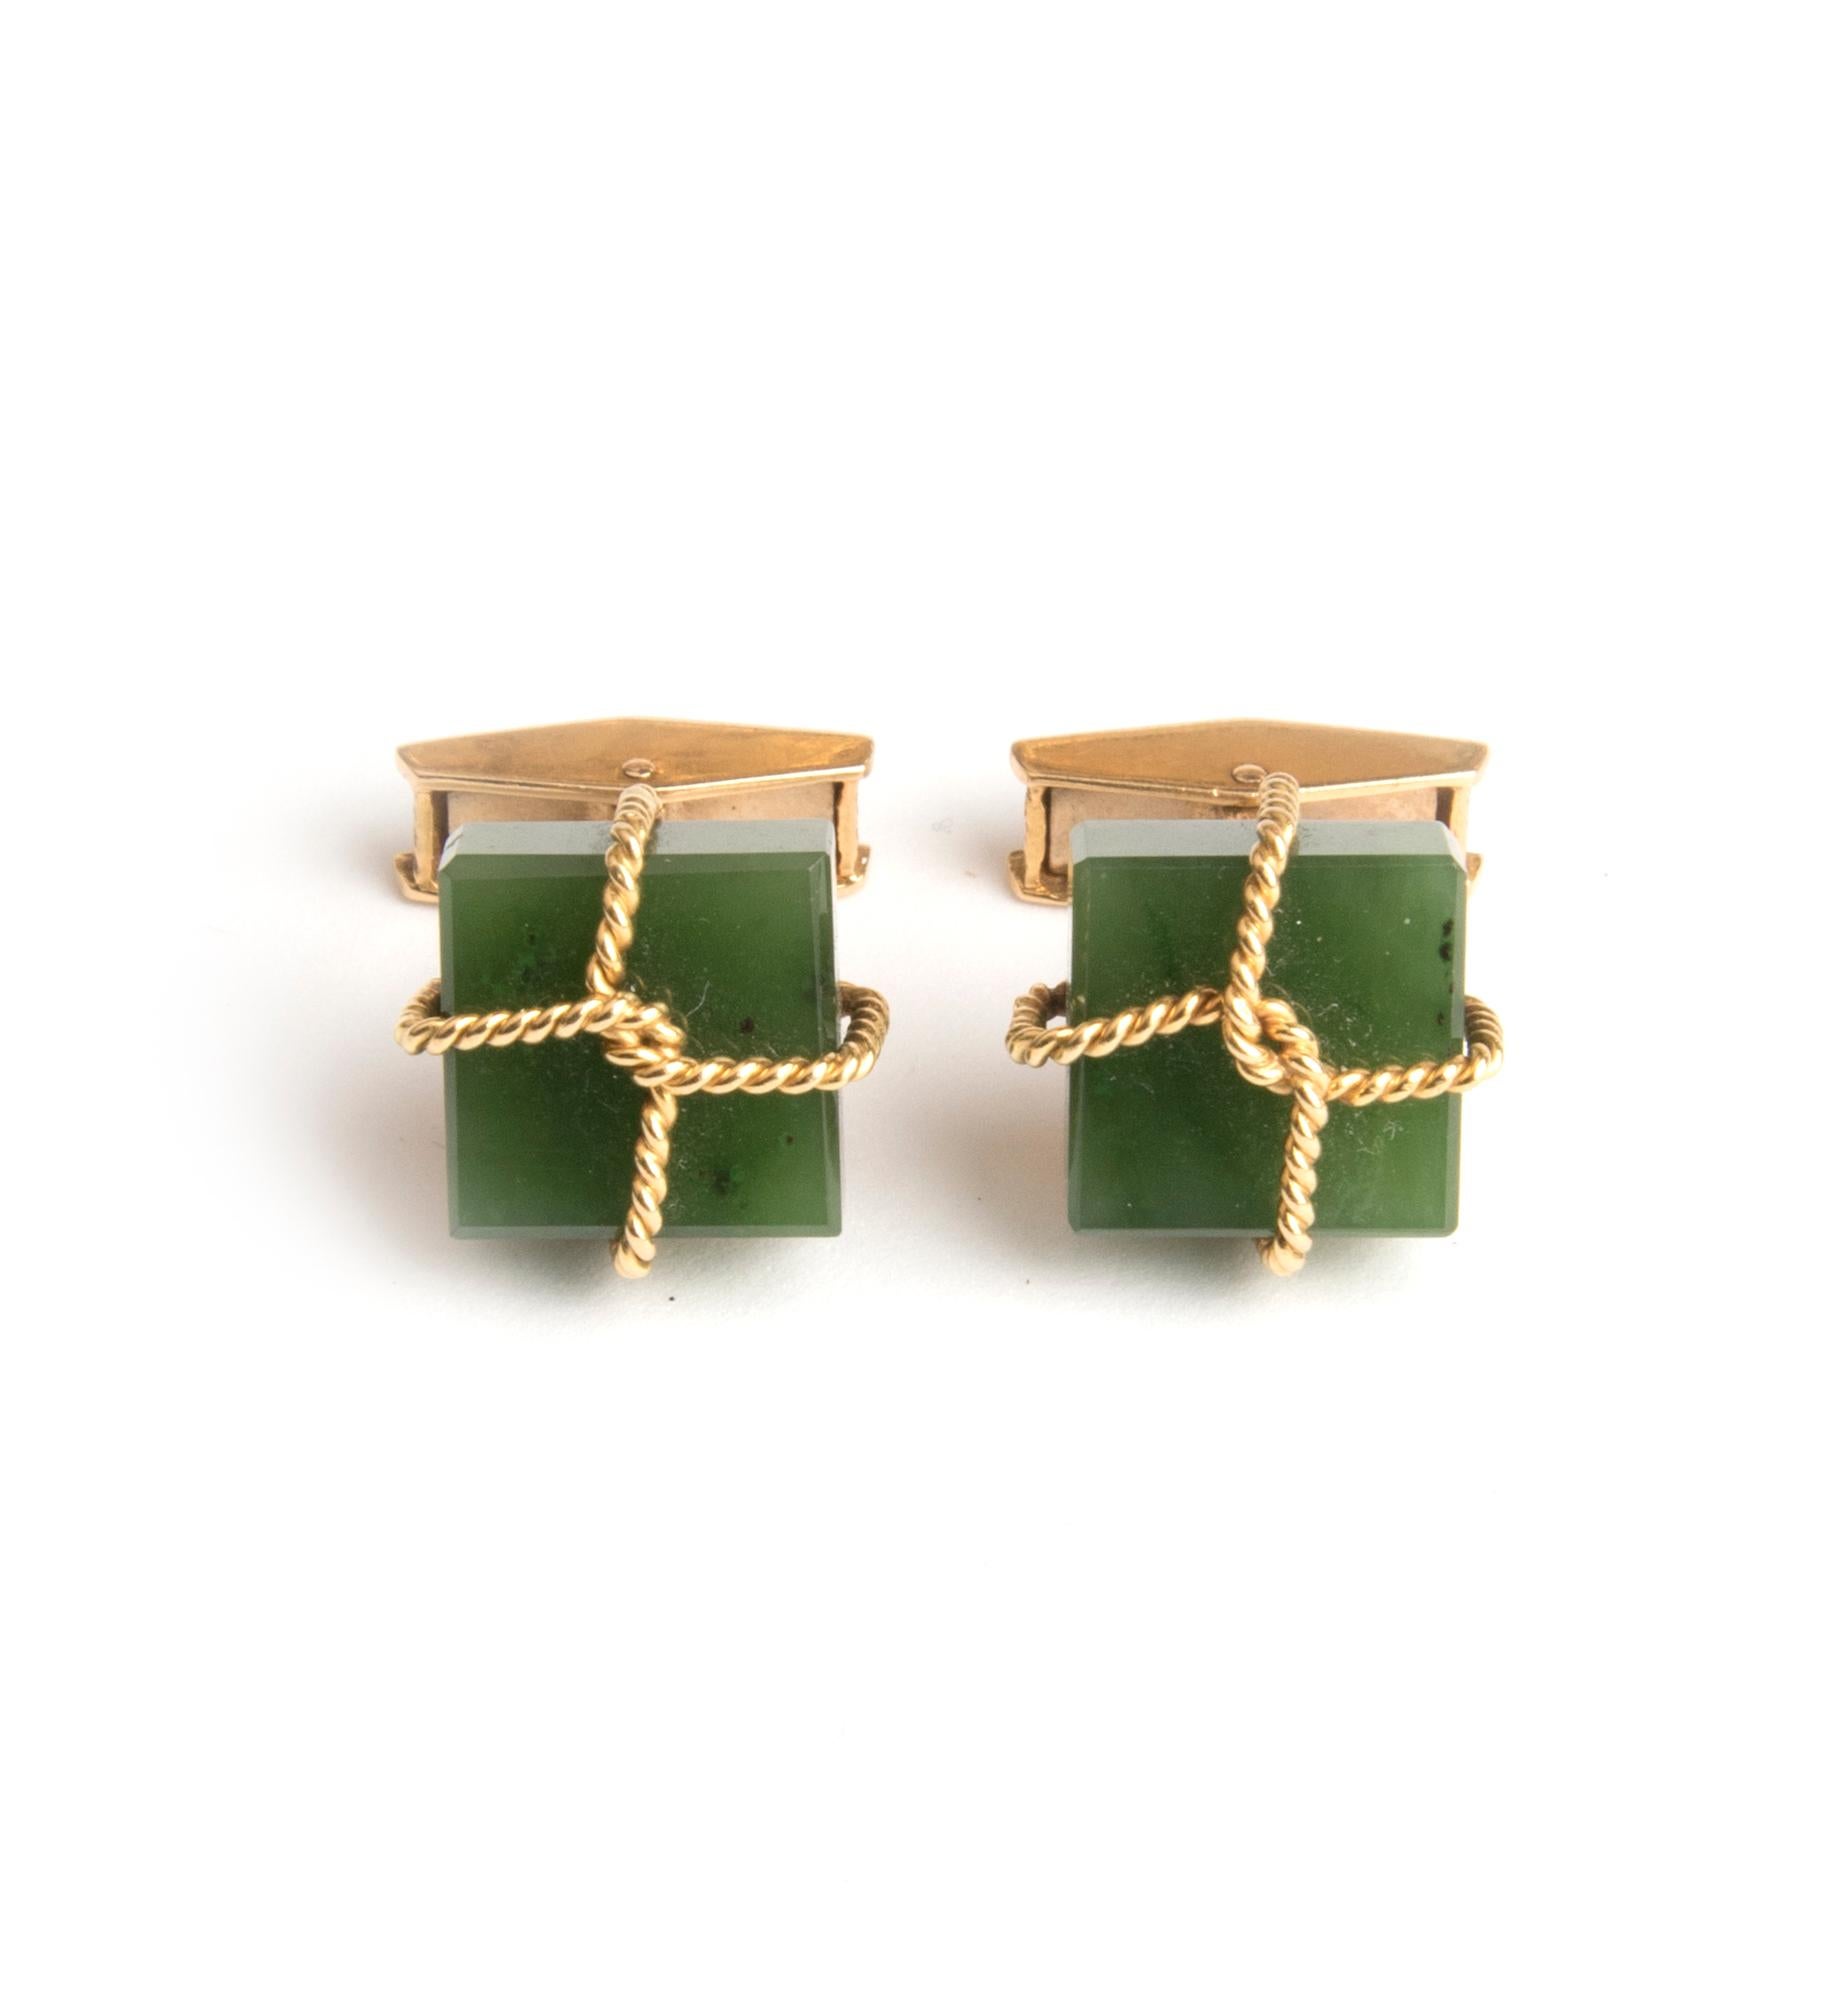 18 Karat Yellow Gold and Jade Package Cufflinks by Alan Gard In Good Condition For Sale In London, GB